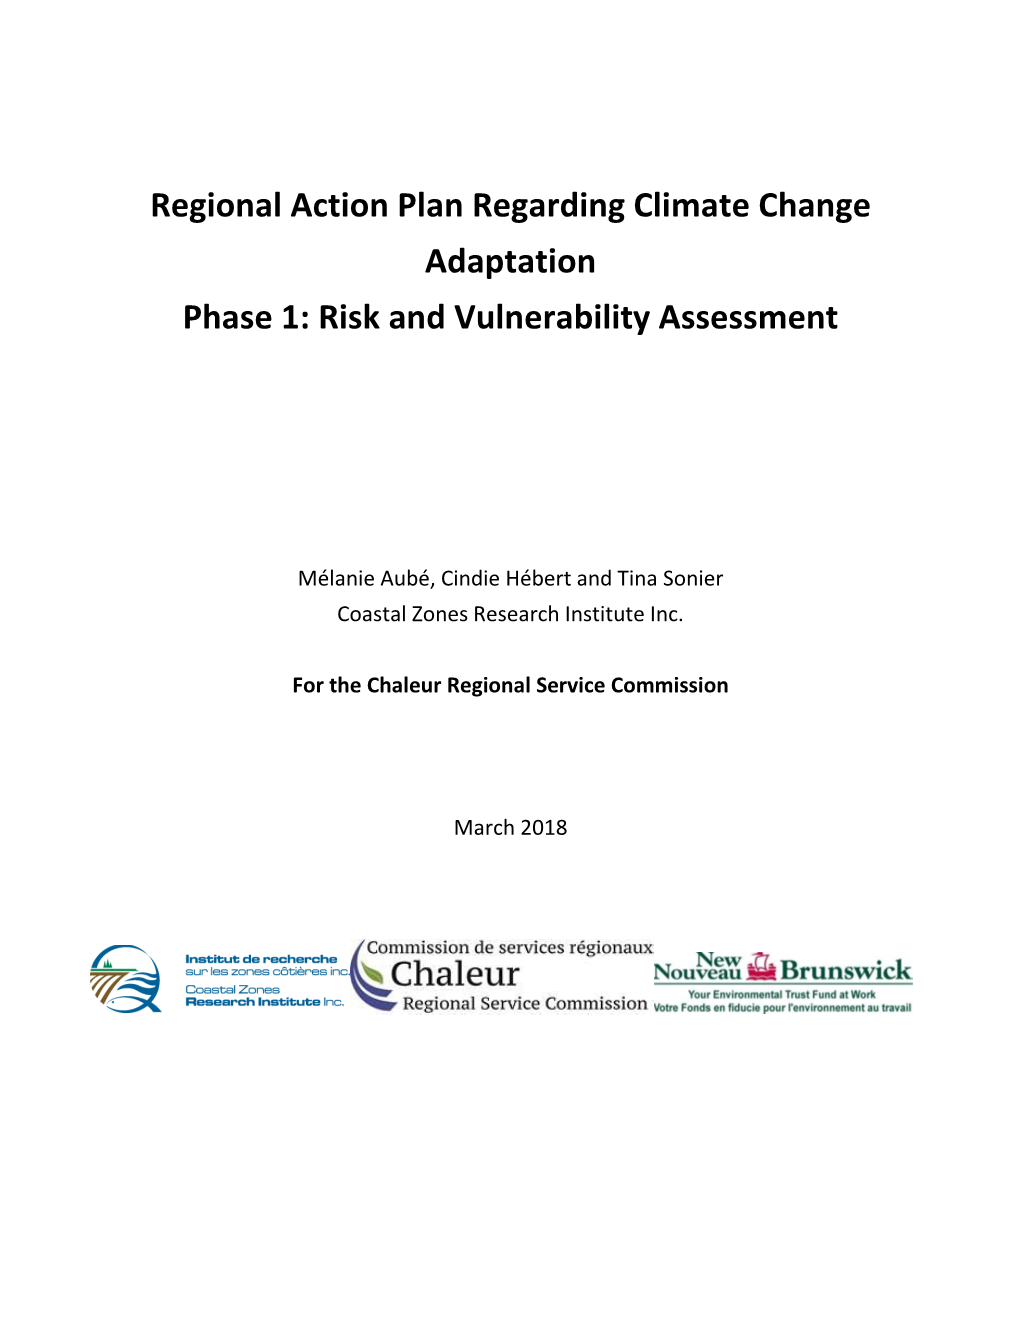 Regional Action Plan Regarding Climate Change Adaptation Phase 1: Risk and Vulnerability Assessment